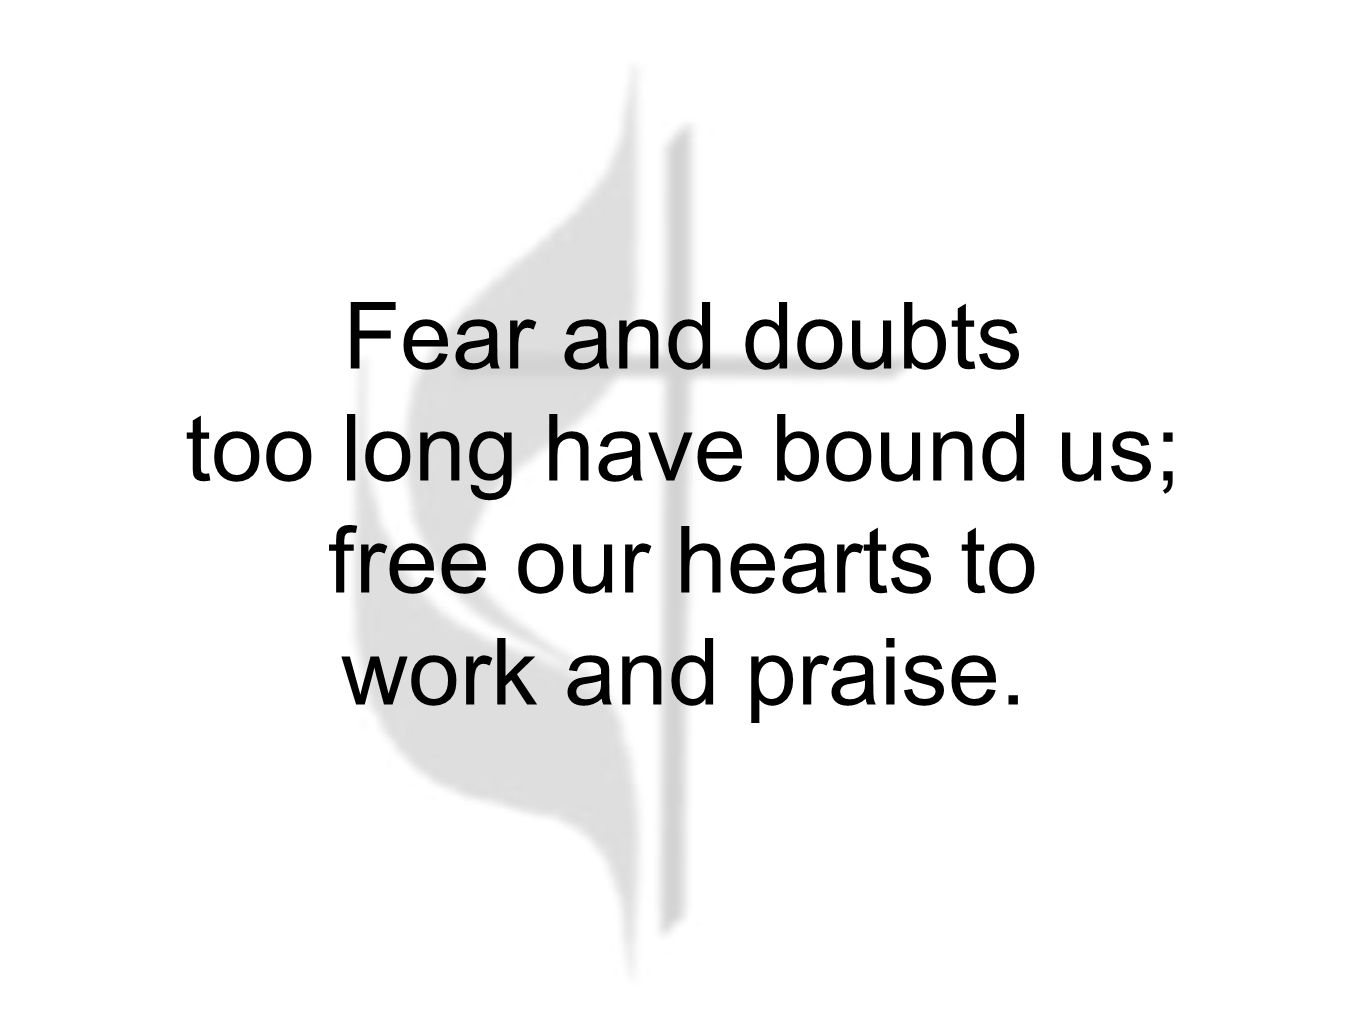 Fear and doubts too long have bound us; free our hearts to work and praise.